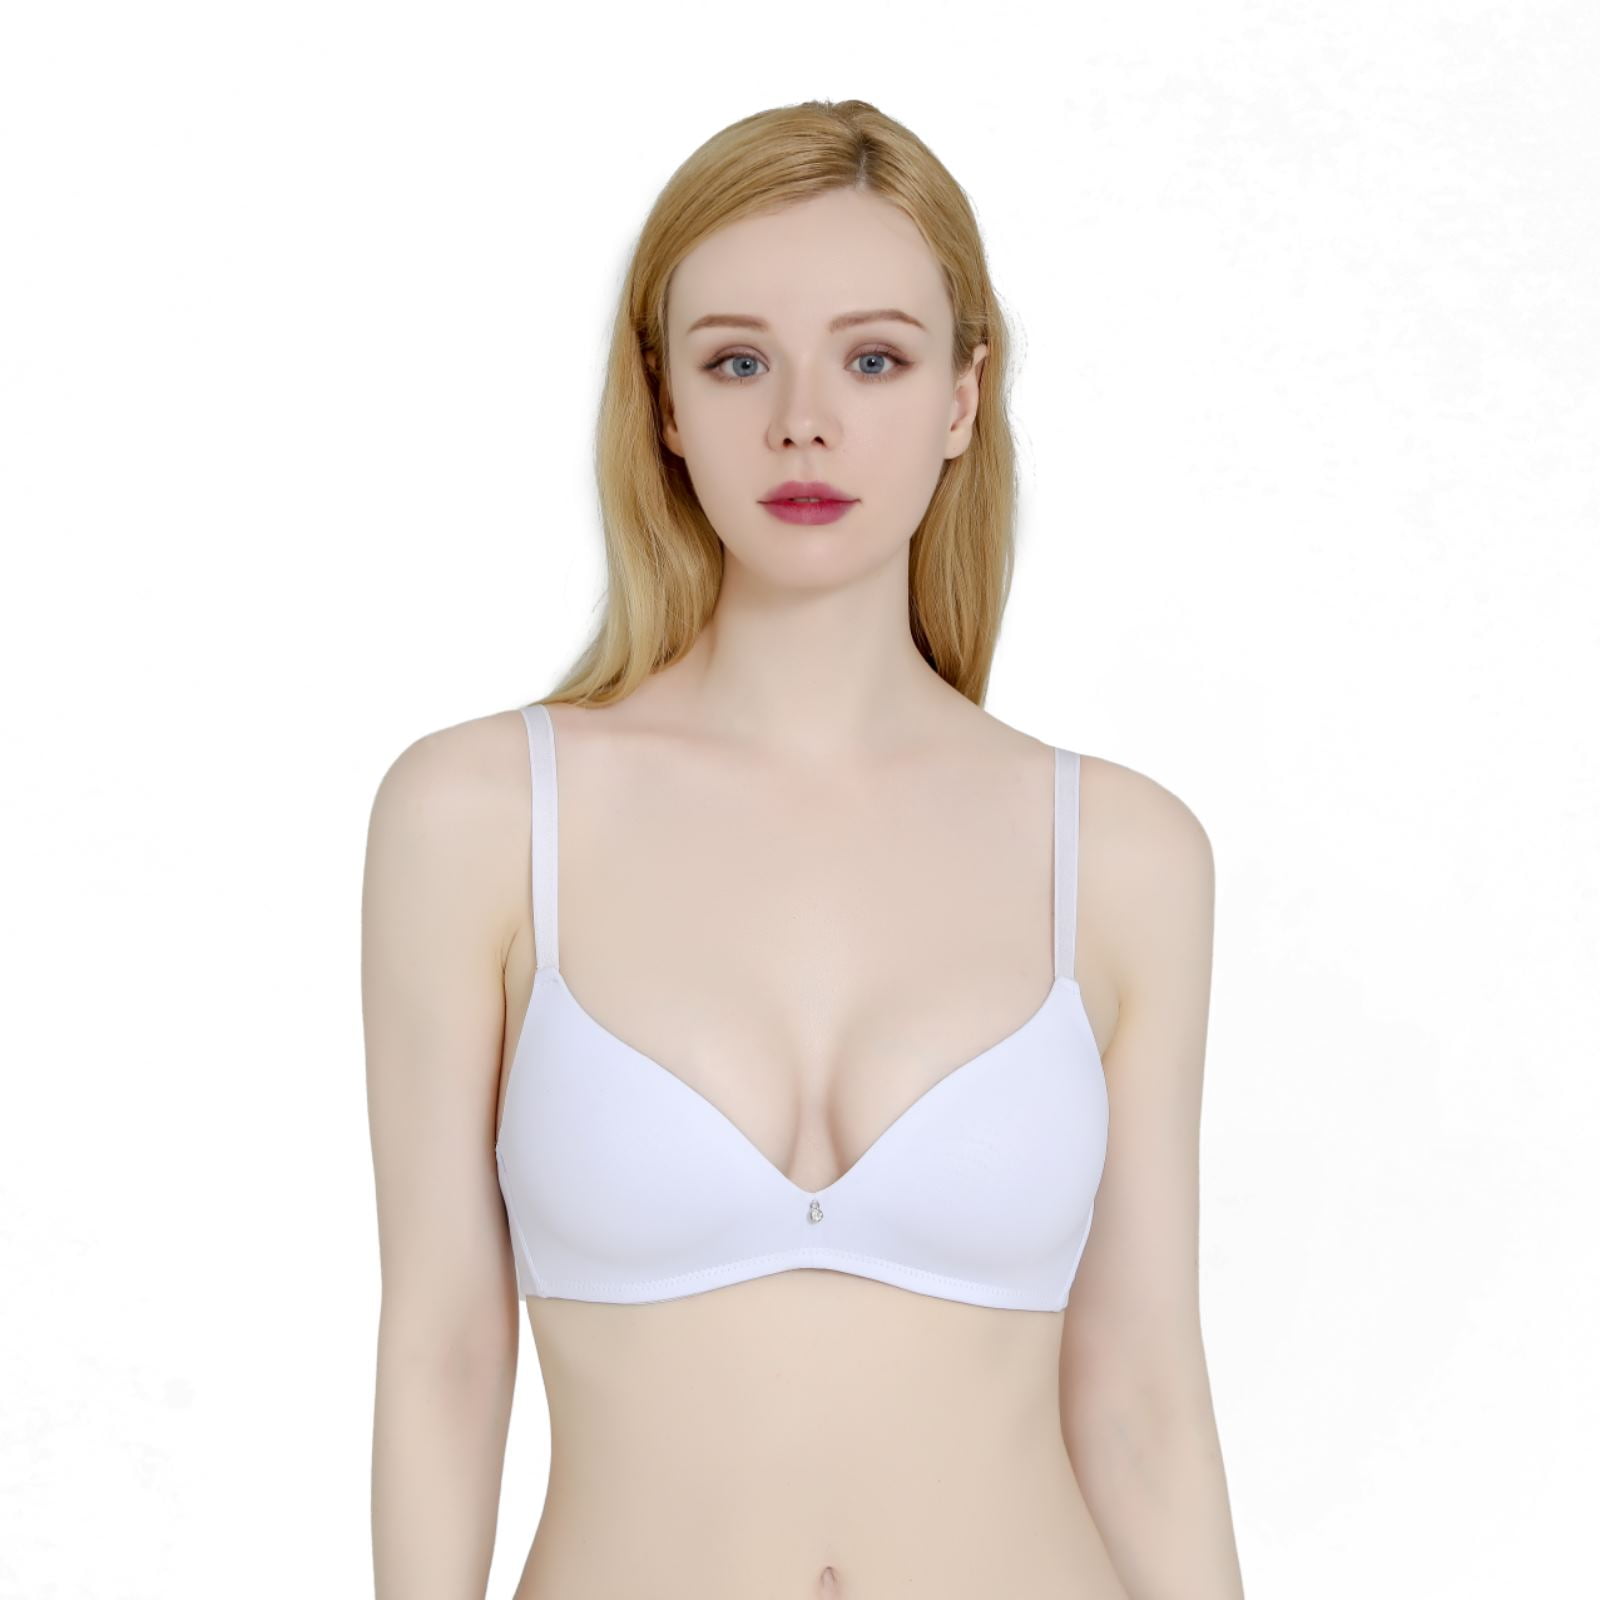 Women Bras 6 Pack of Basic No Wire Free Wireless Bra B Cup C Cup Size 42C  (S6647) 